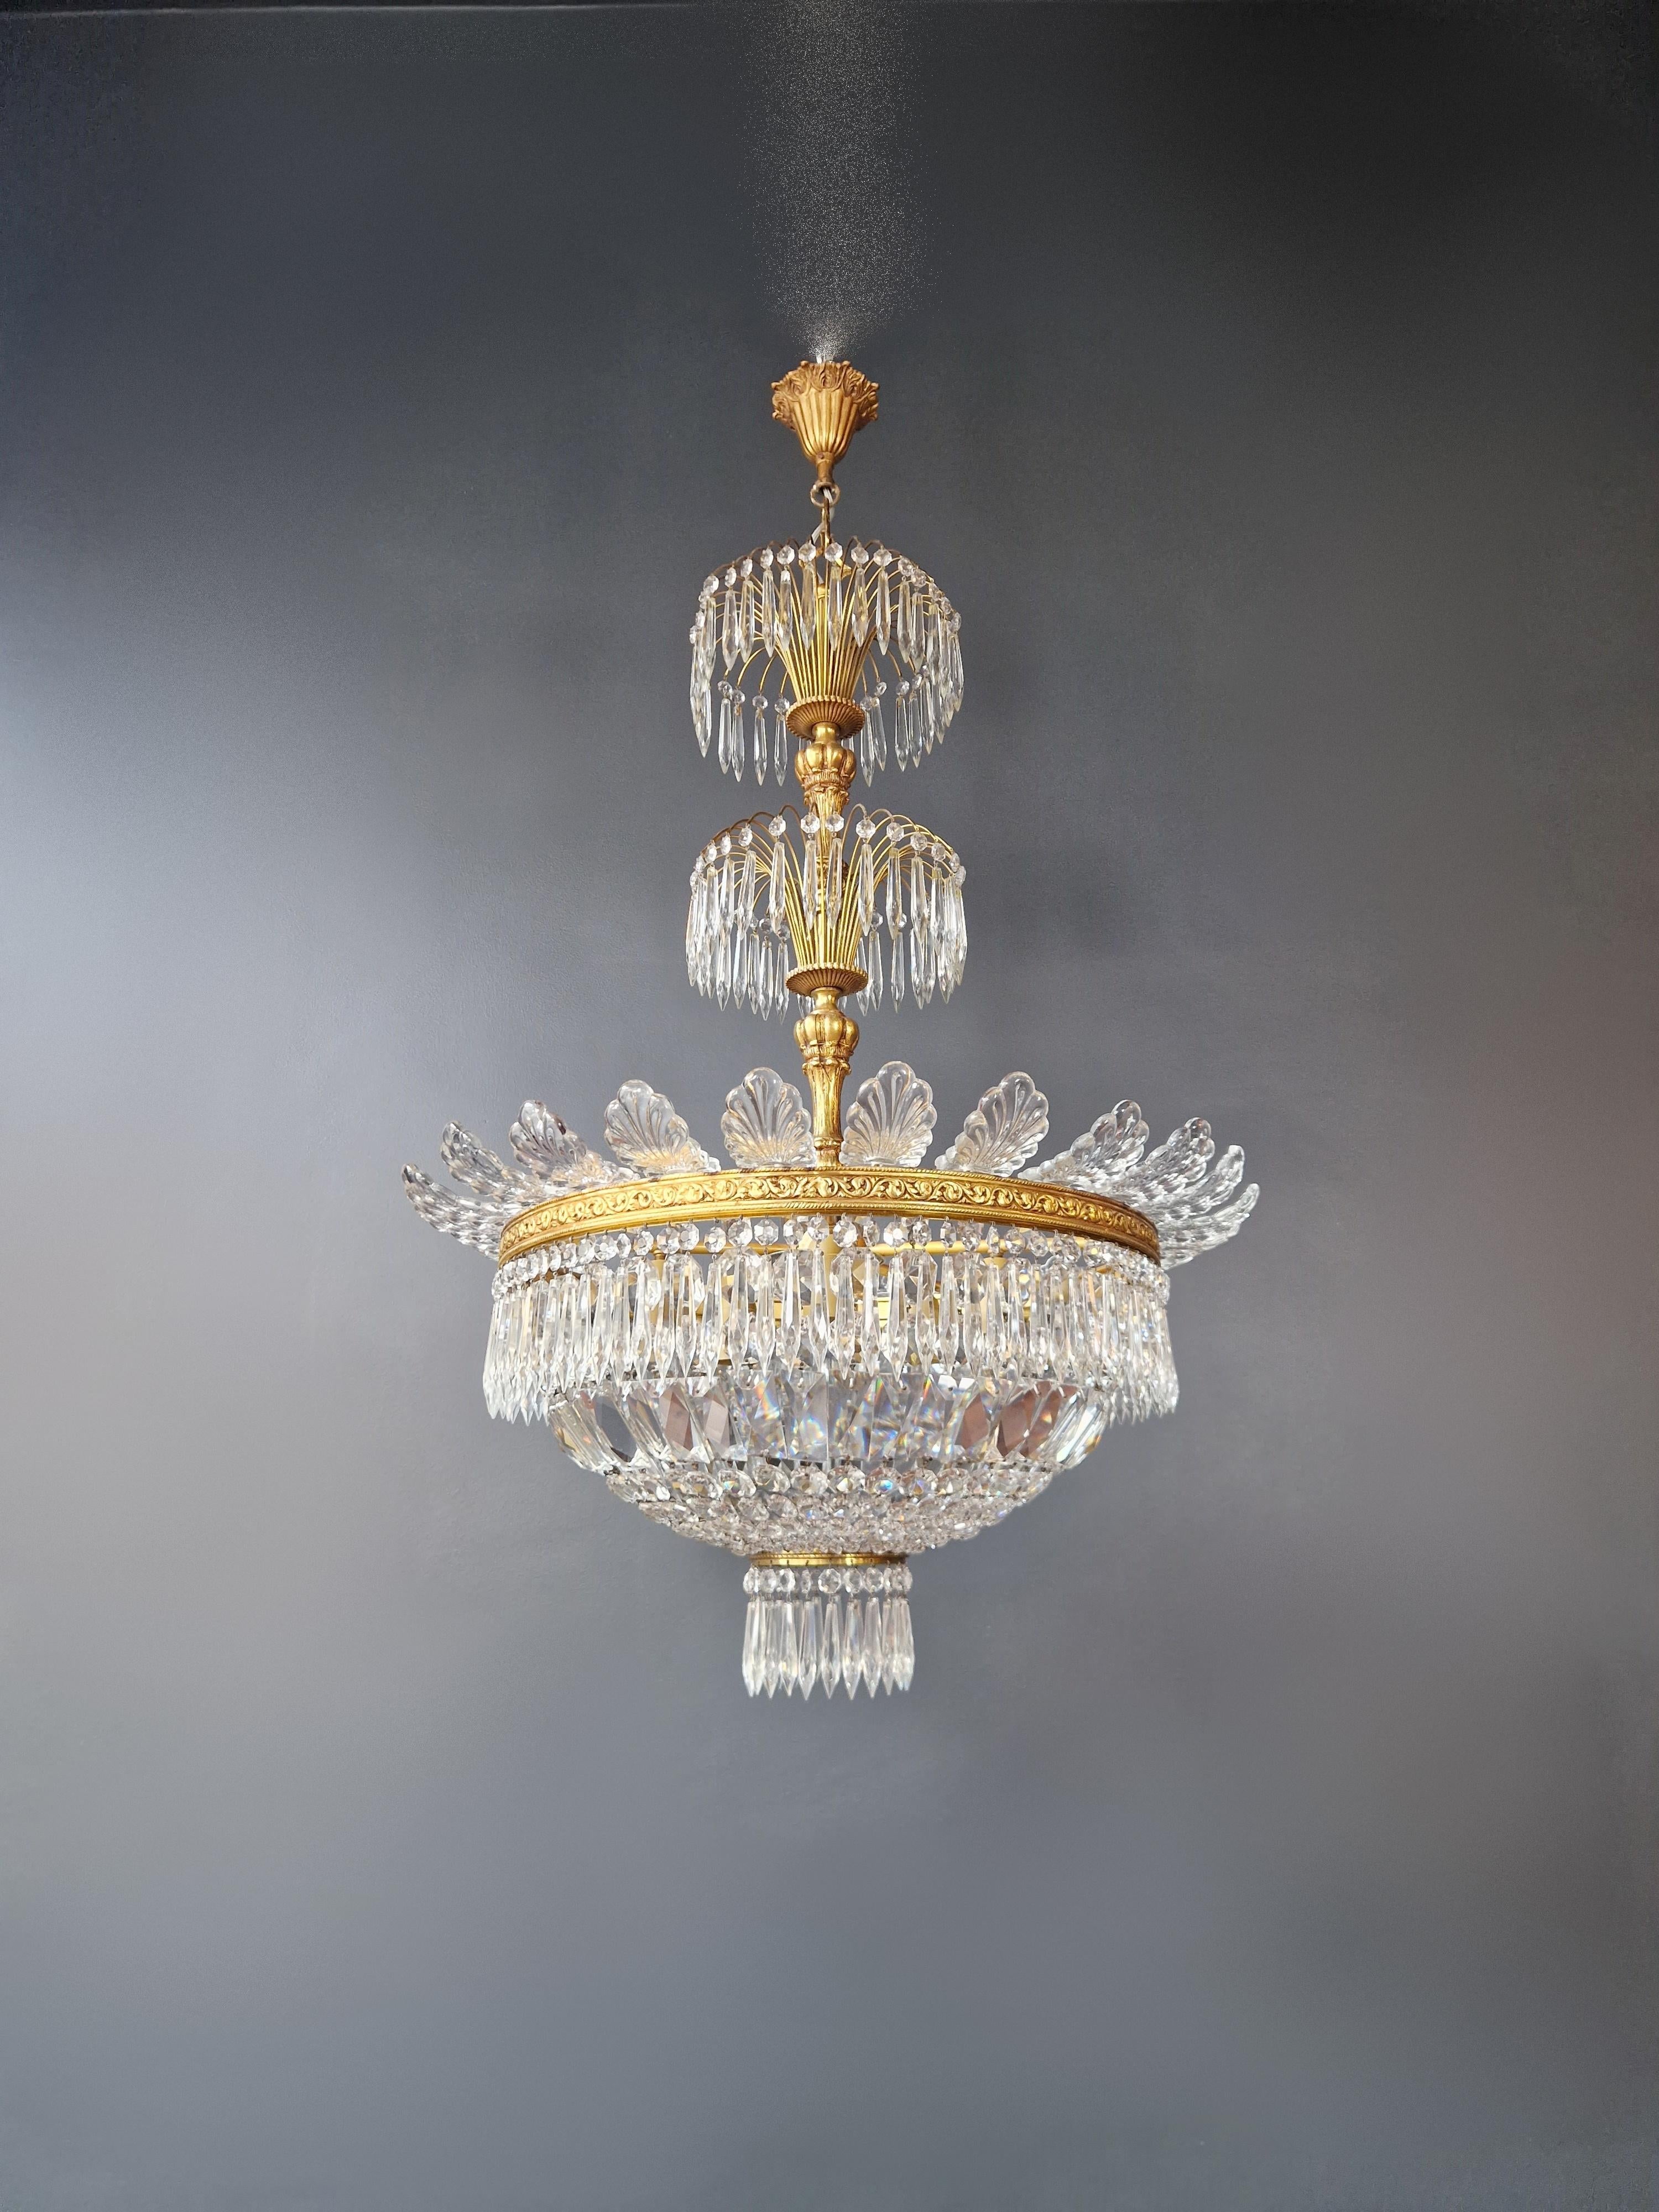 Pair Basket Chandelier Crystal Empire Brass Sac a Pearl Lustre Ceiling Antique For Sale 4